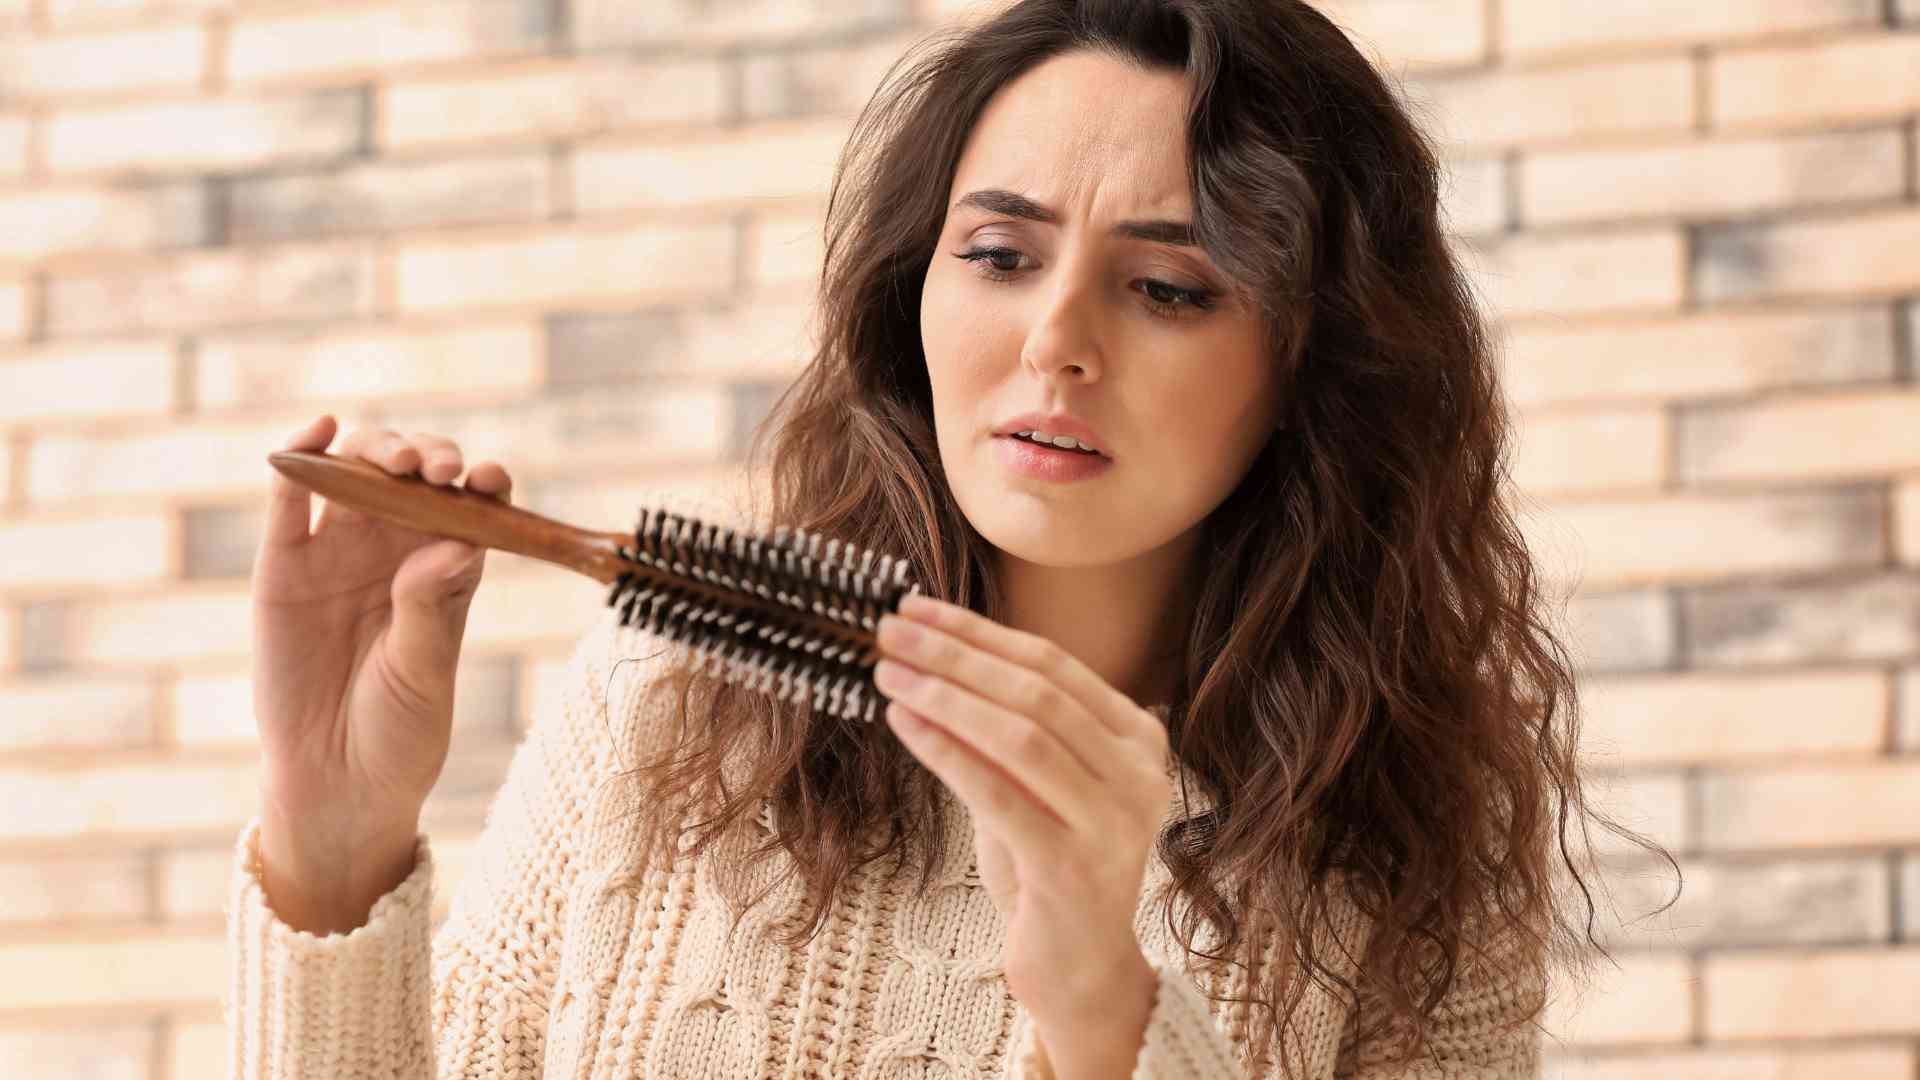 What role does gut health play in hair loss prevention, and how can it be improved